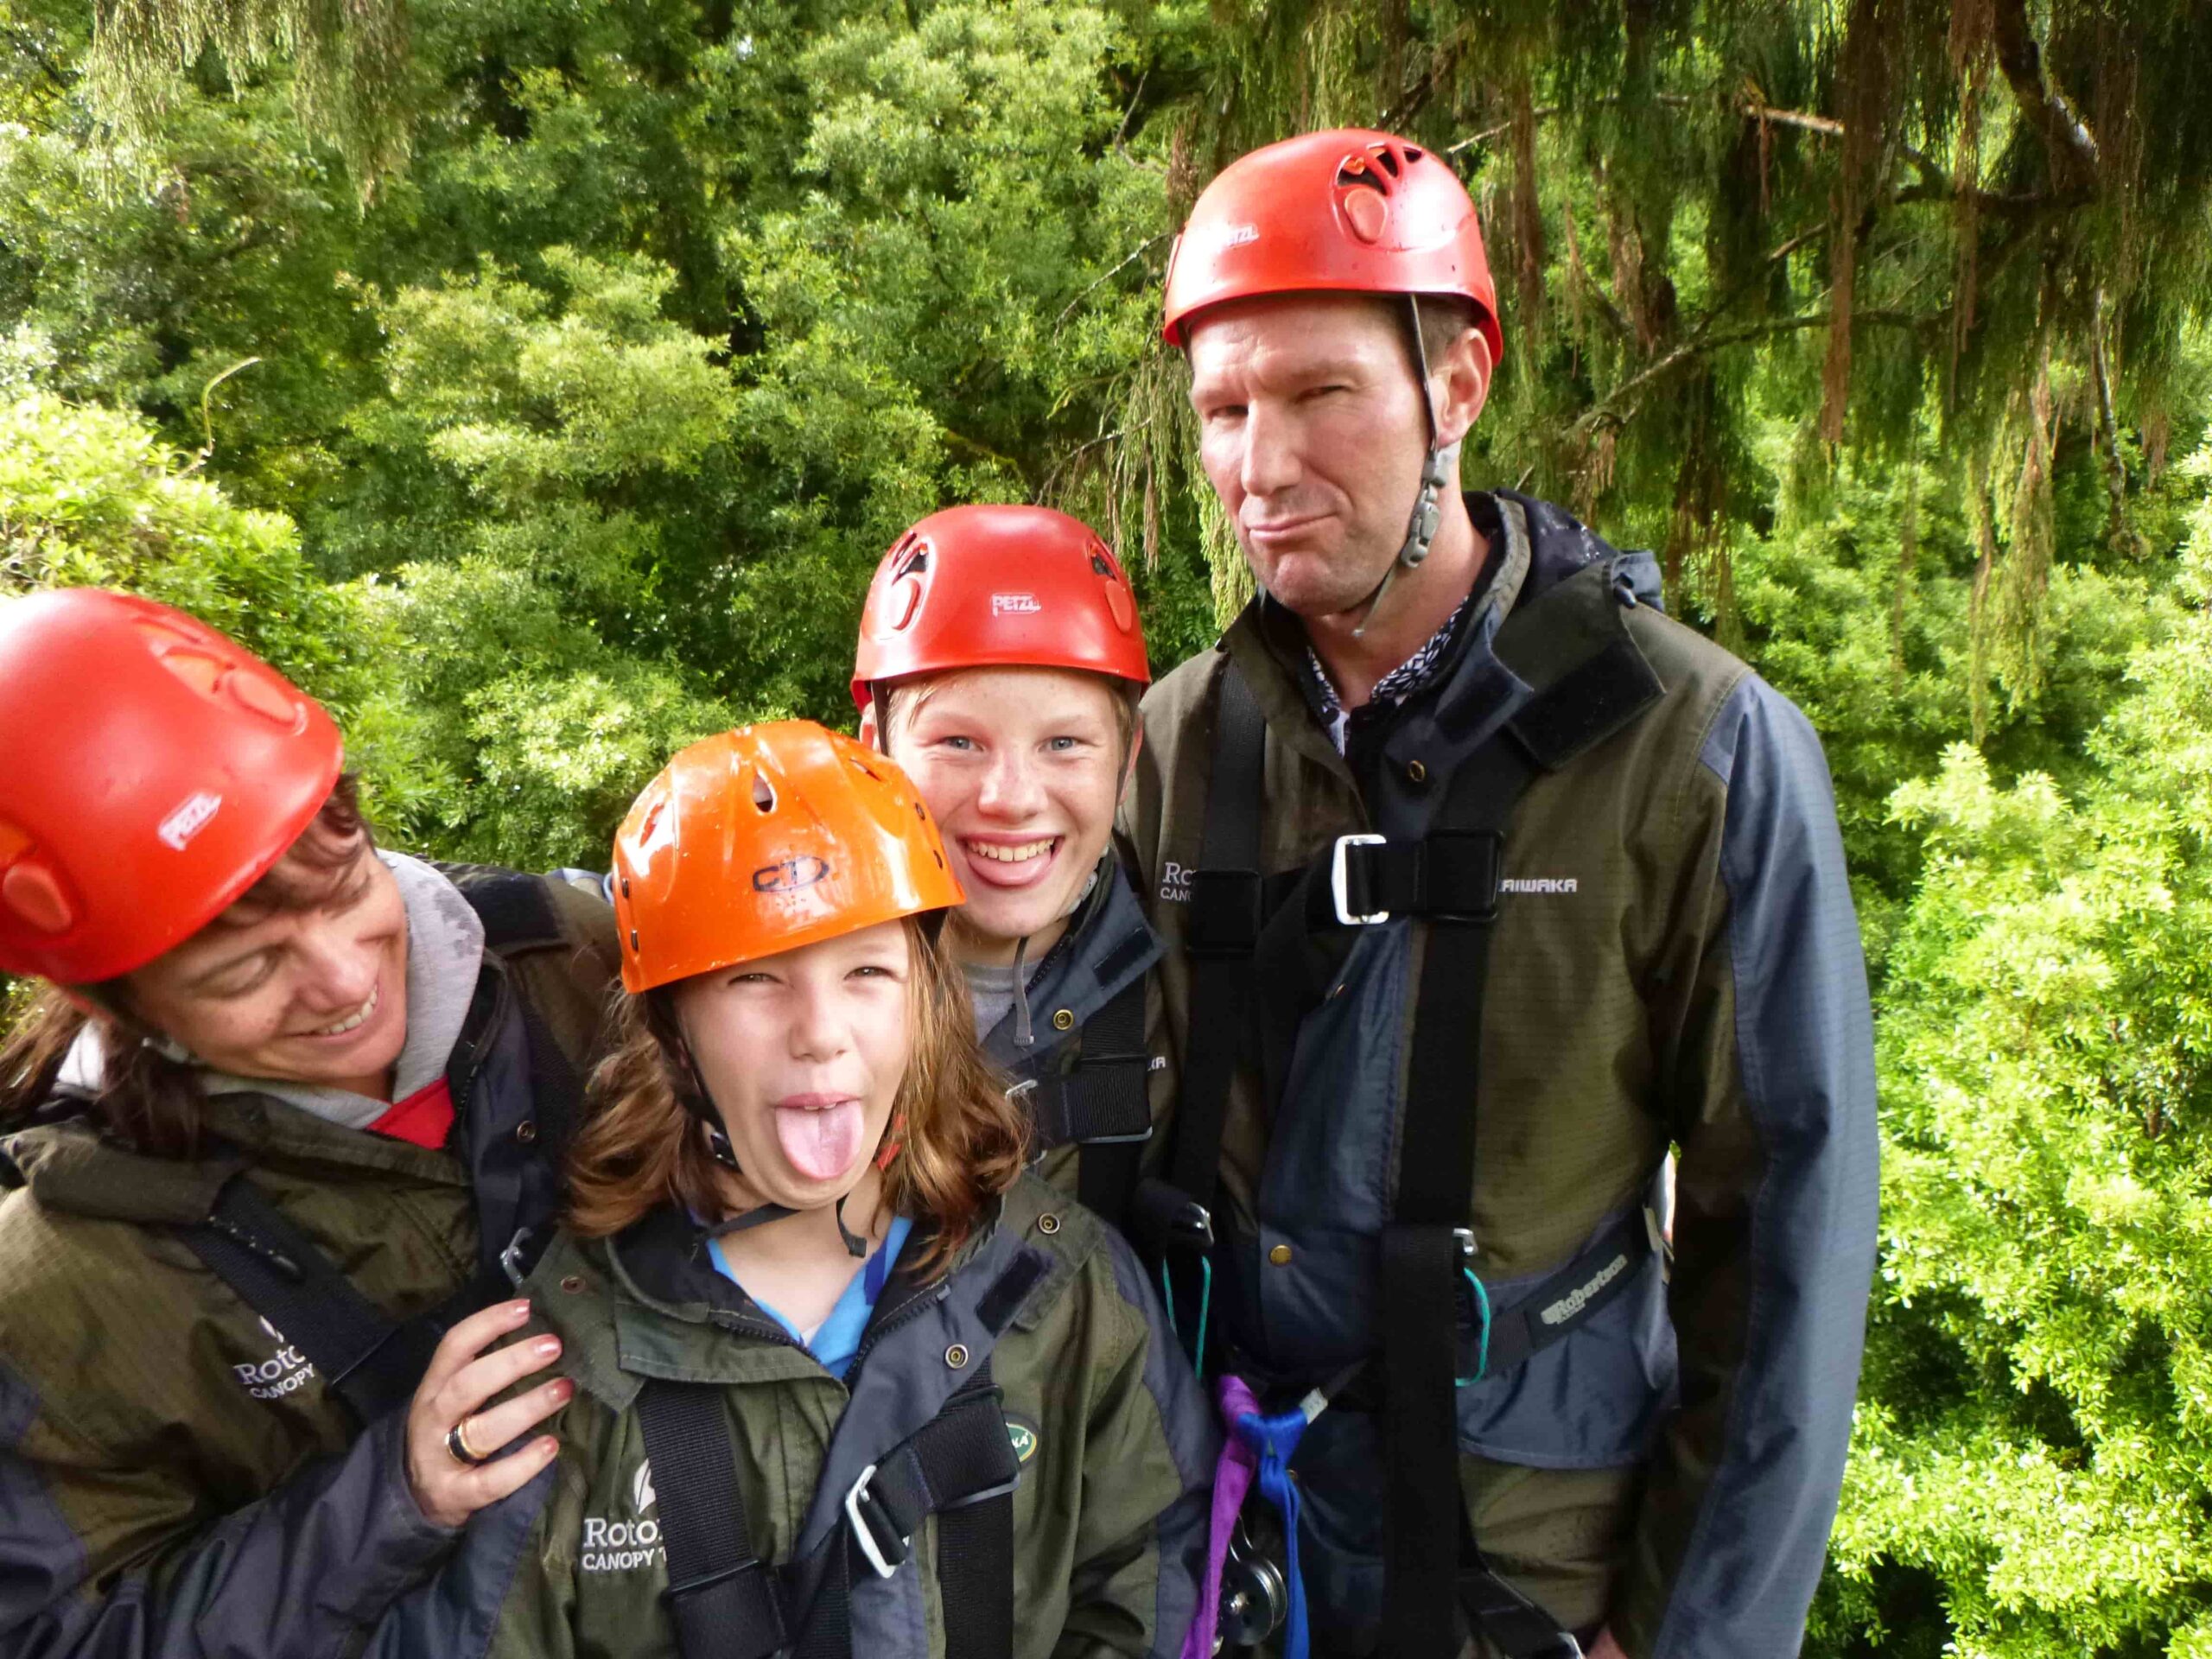 Looking for things to do in Rotorua with kids these school holidays?